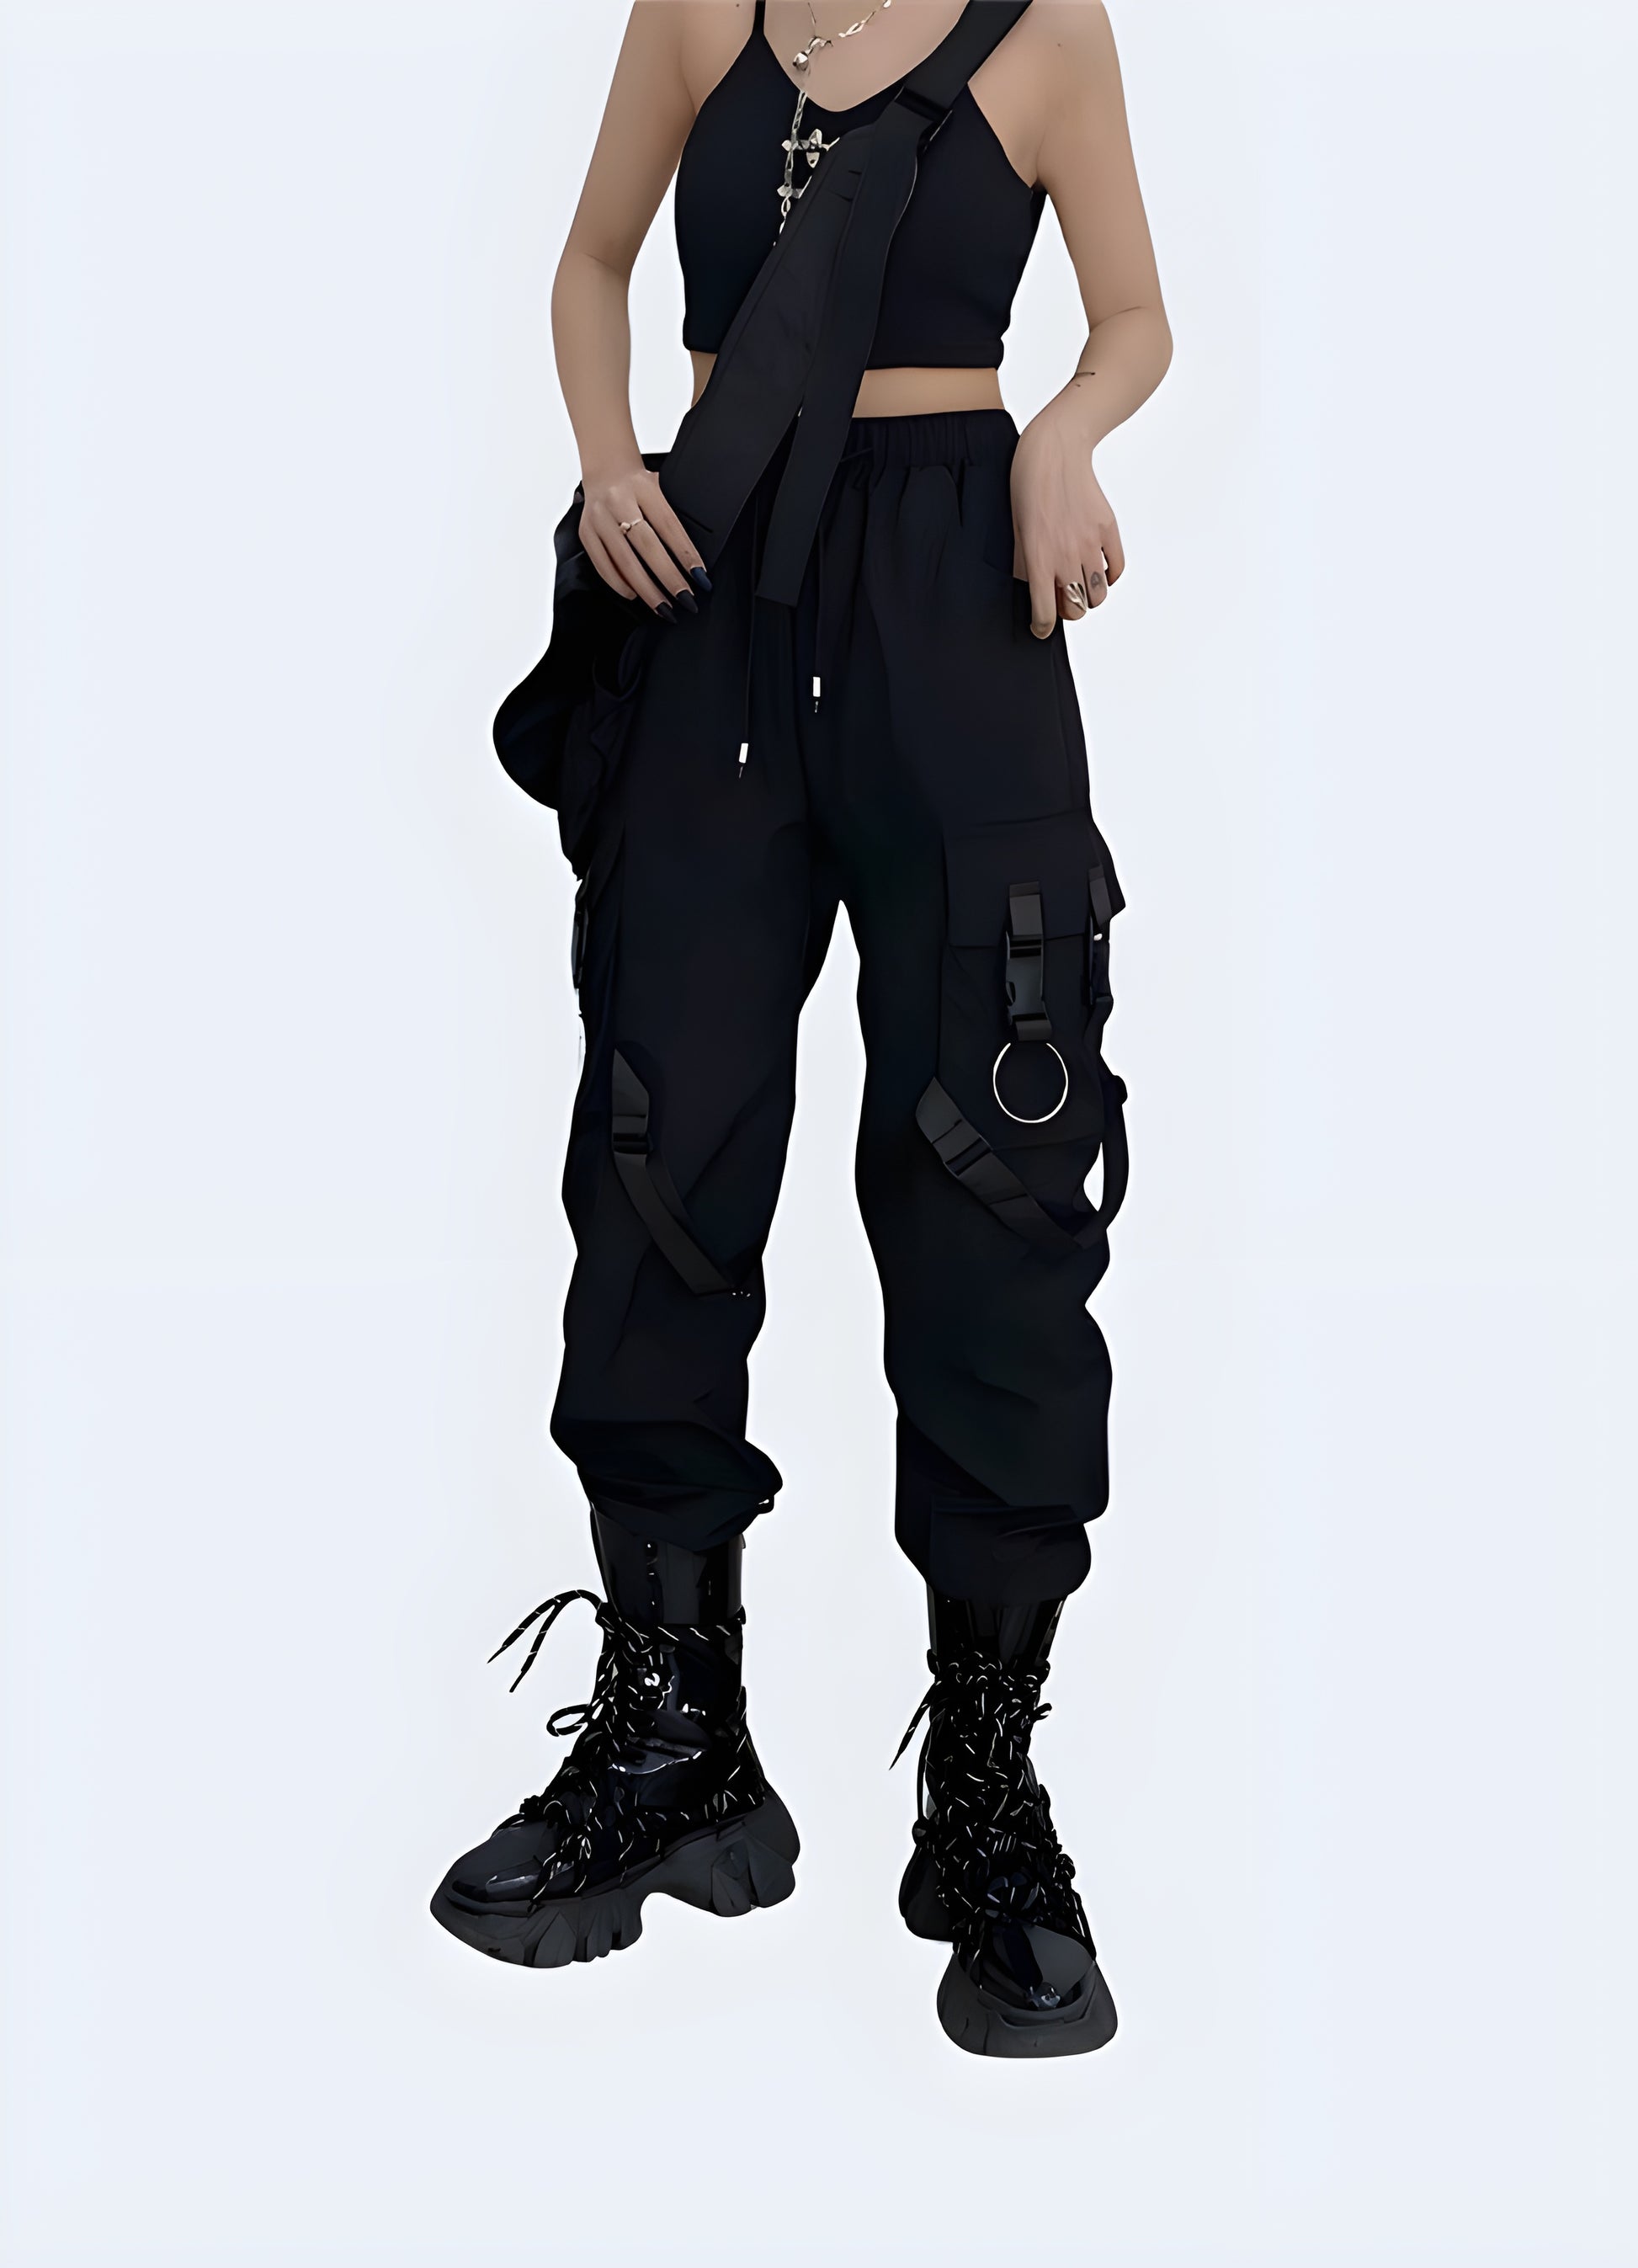  Move freely in Women's Tactical Cargo Pants.